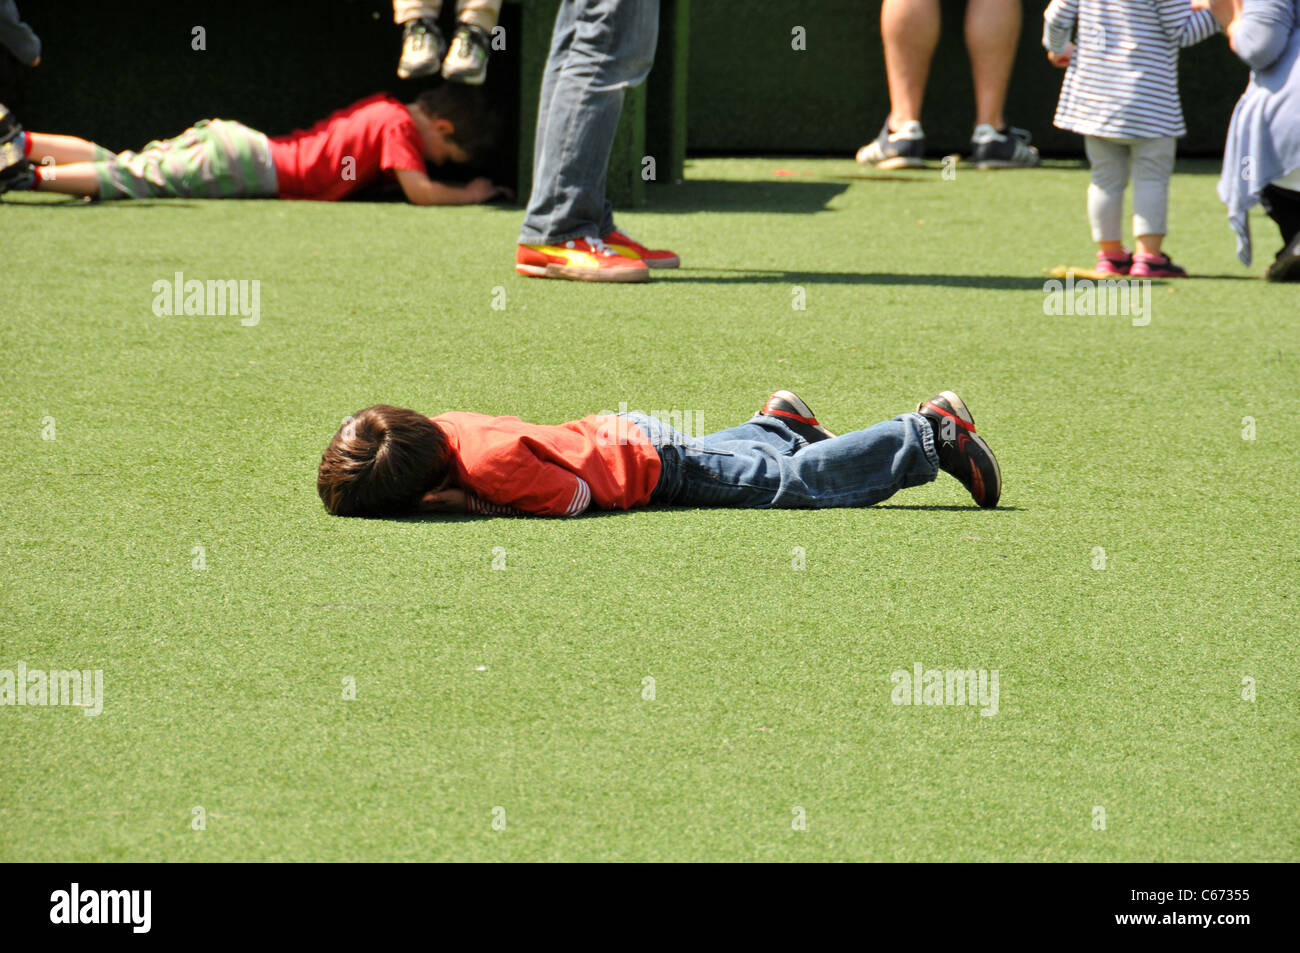 Lonely child alone separated sad ignored child playing lying face down having fun sunny day London Stock Photo